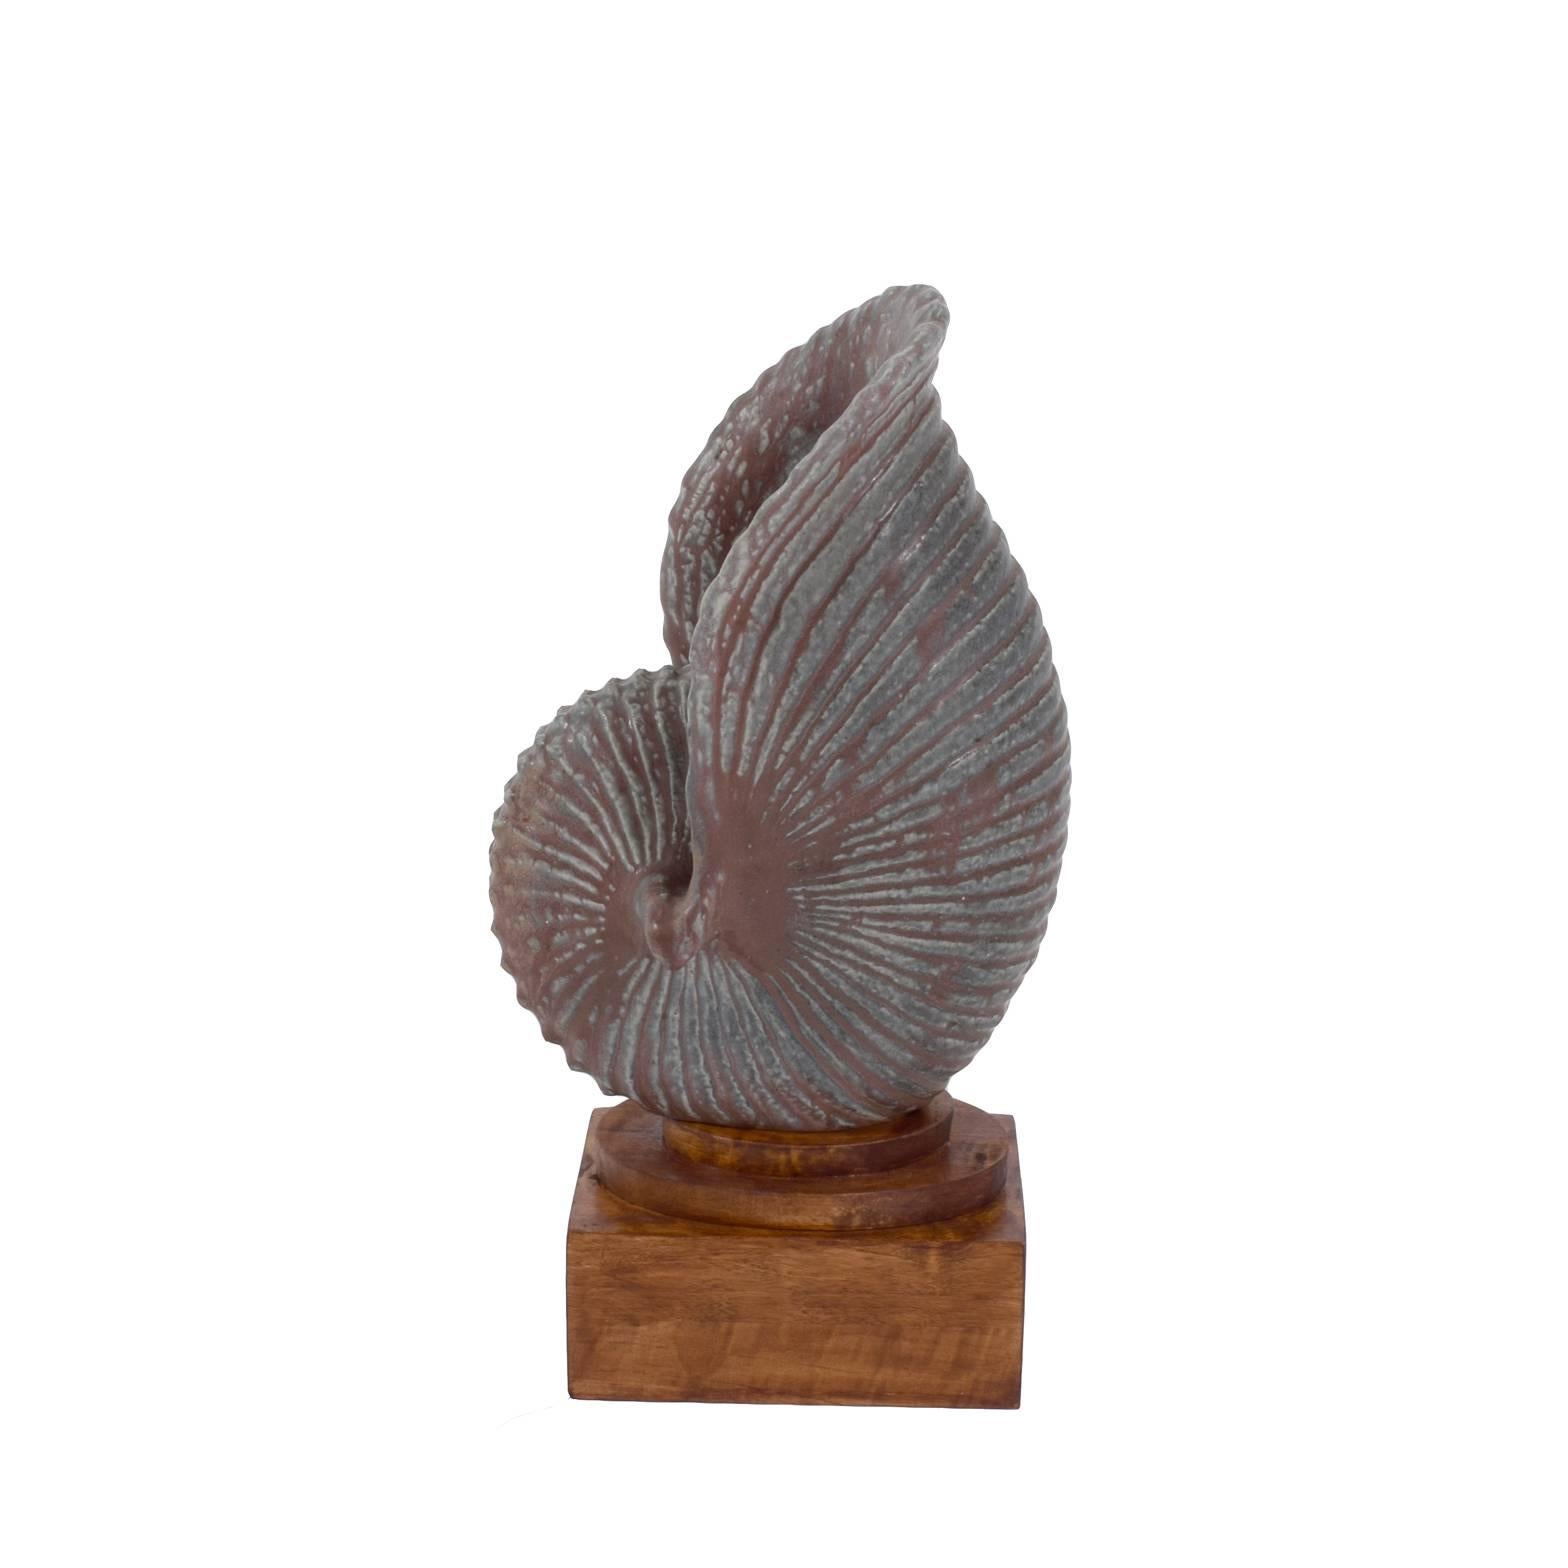 Large seashell sculpture design by Gunnar Nylund made by Rörstrand in Sweden, circa 1960 signed on the bottom size with the pedestal.